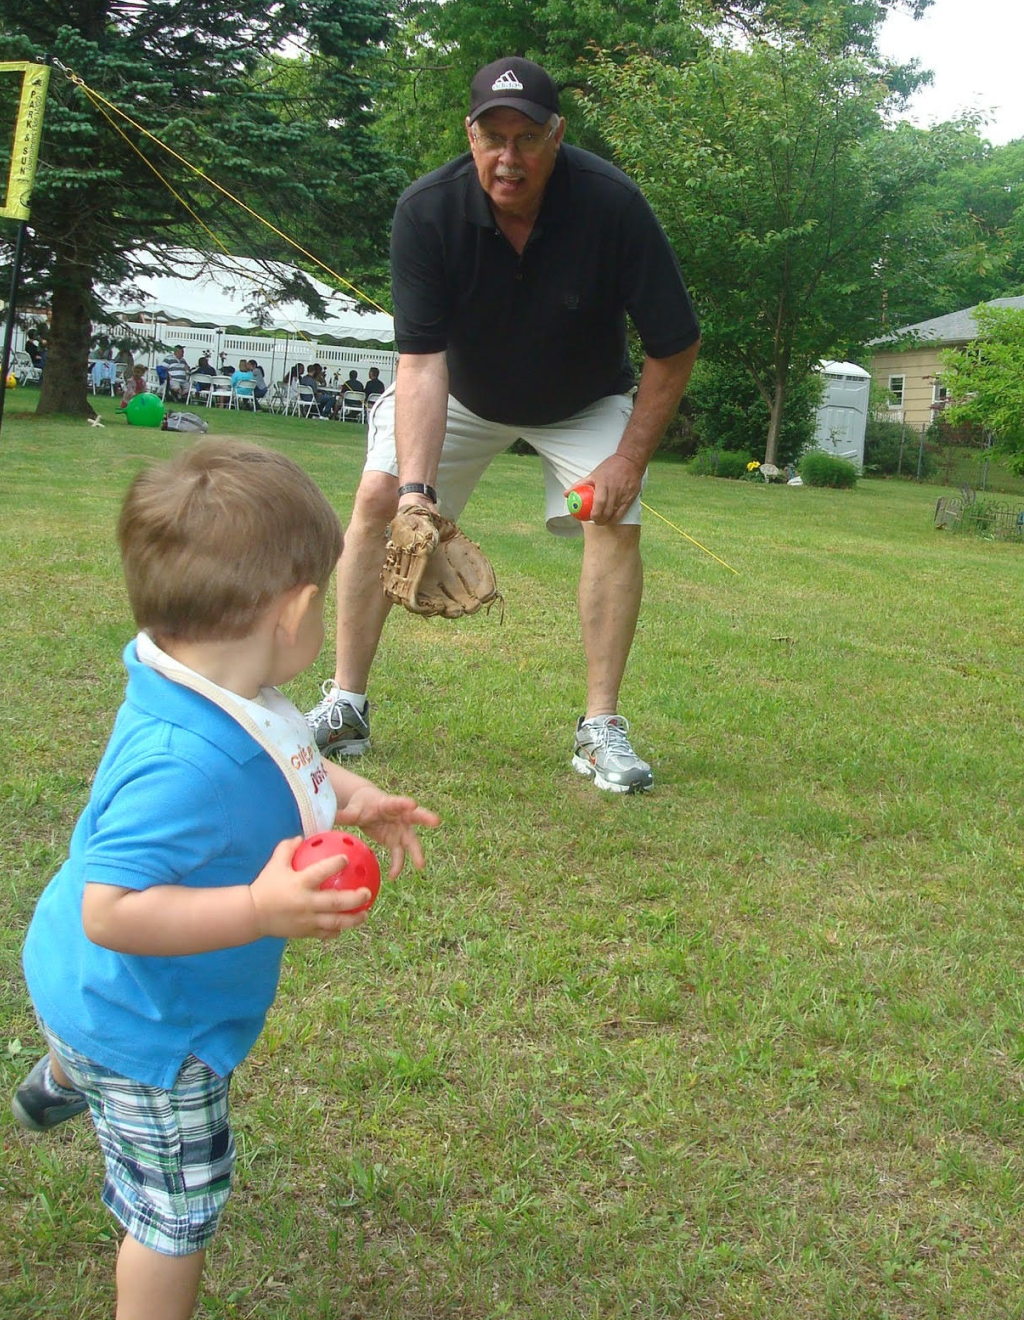 Tom Emig's father playing catch with his son